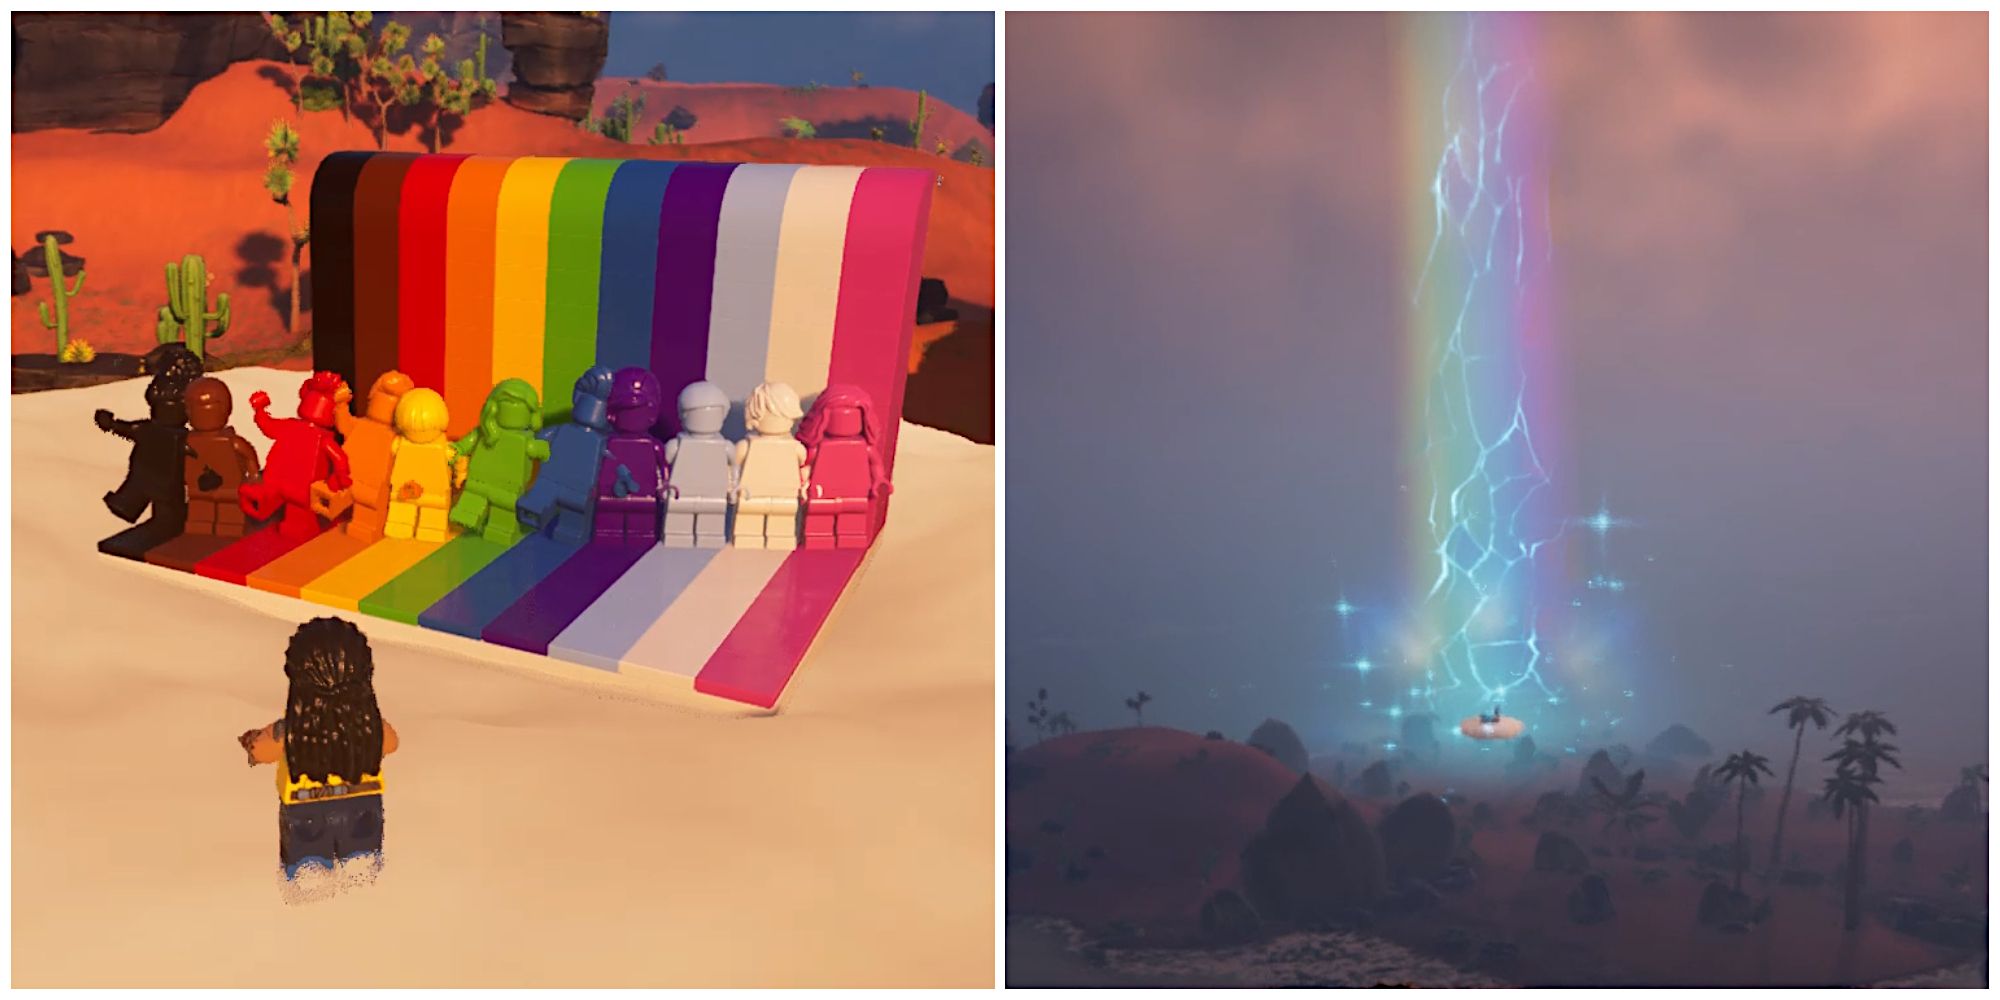 Split image of a character emoting on a rainbow cloud and an image of a rainbow from far away in Lego Fortnite